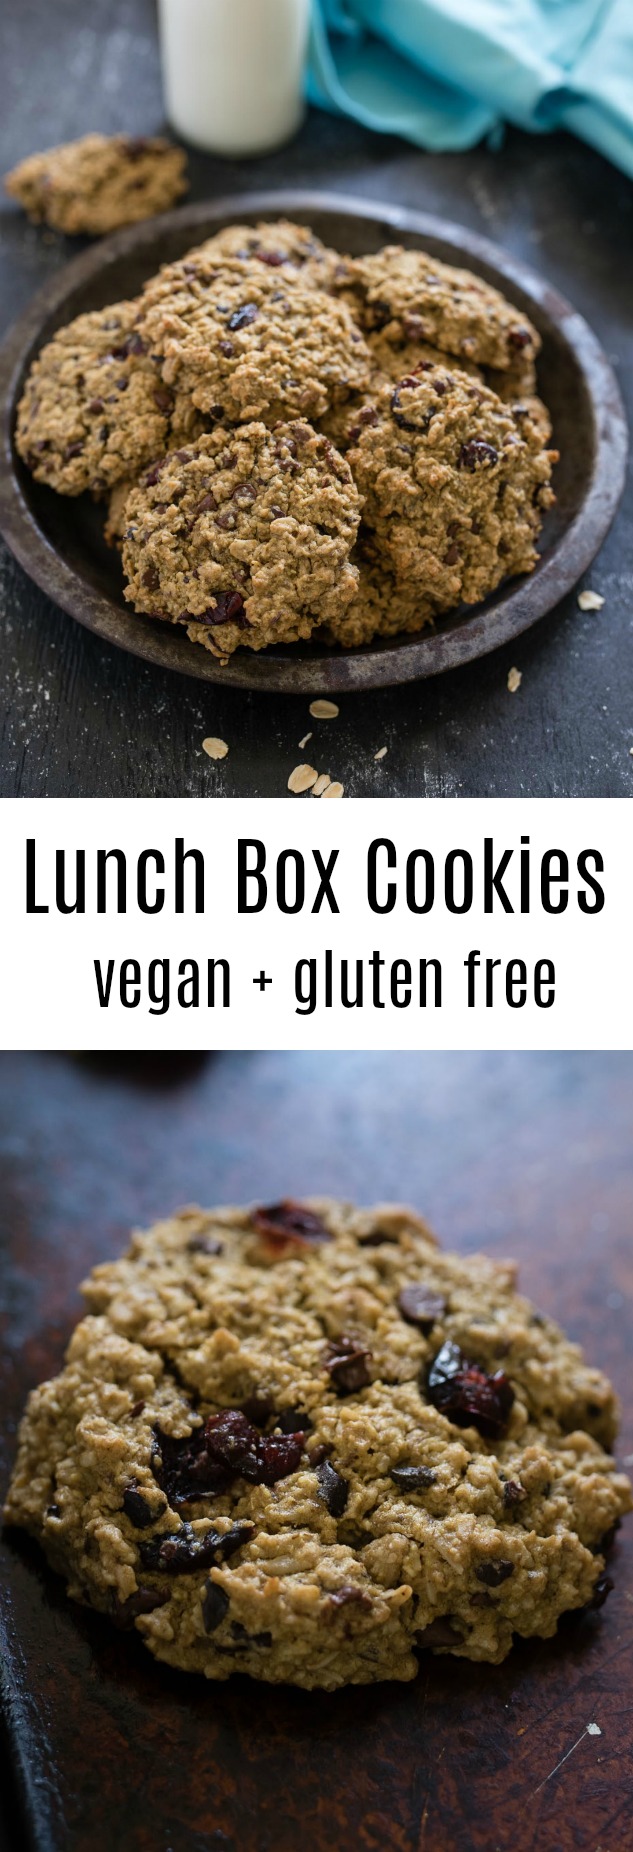 Lunch Box Cookies are both nutritious and delicious- a hearty soft cookie packed with oats, chocolate chips, cranberries and cocoa nibs and reduced amounts of sugar and oil.